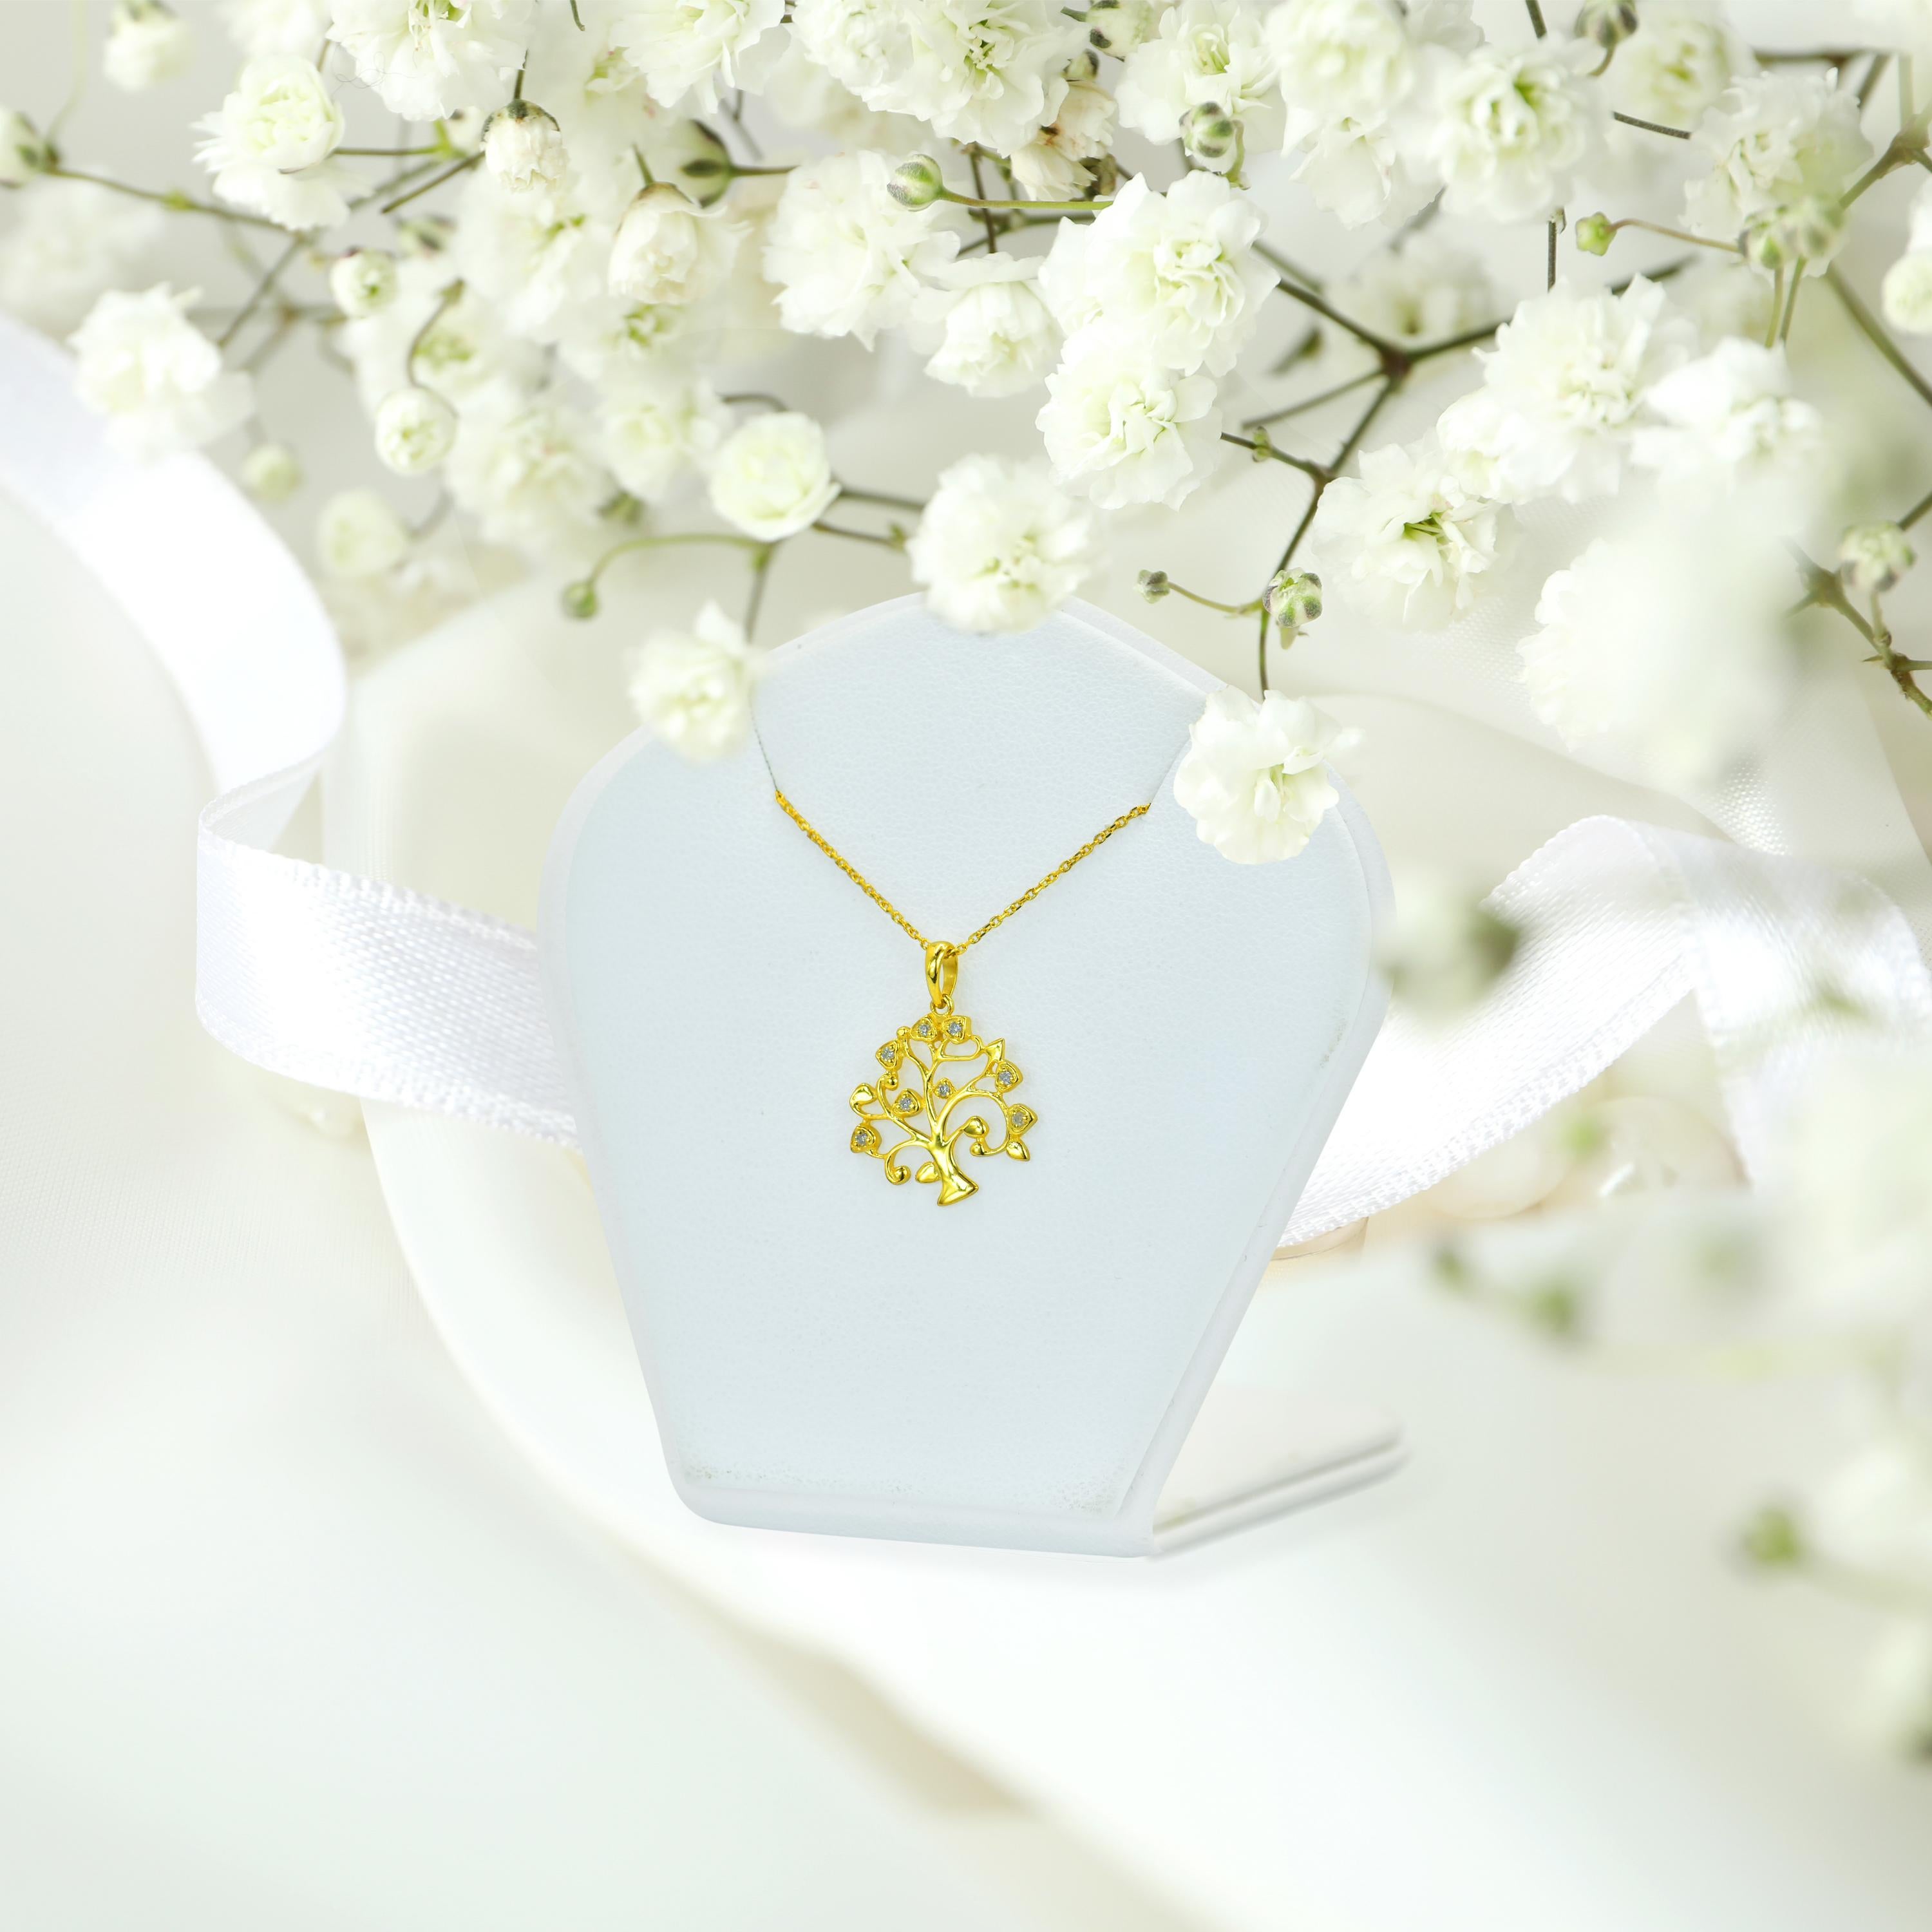 Contemporary 18k Gold Tree of Life Pendant Necklace Diamond Spiritual Delicate Necklace For Sale